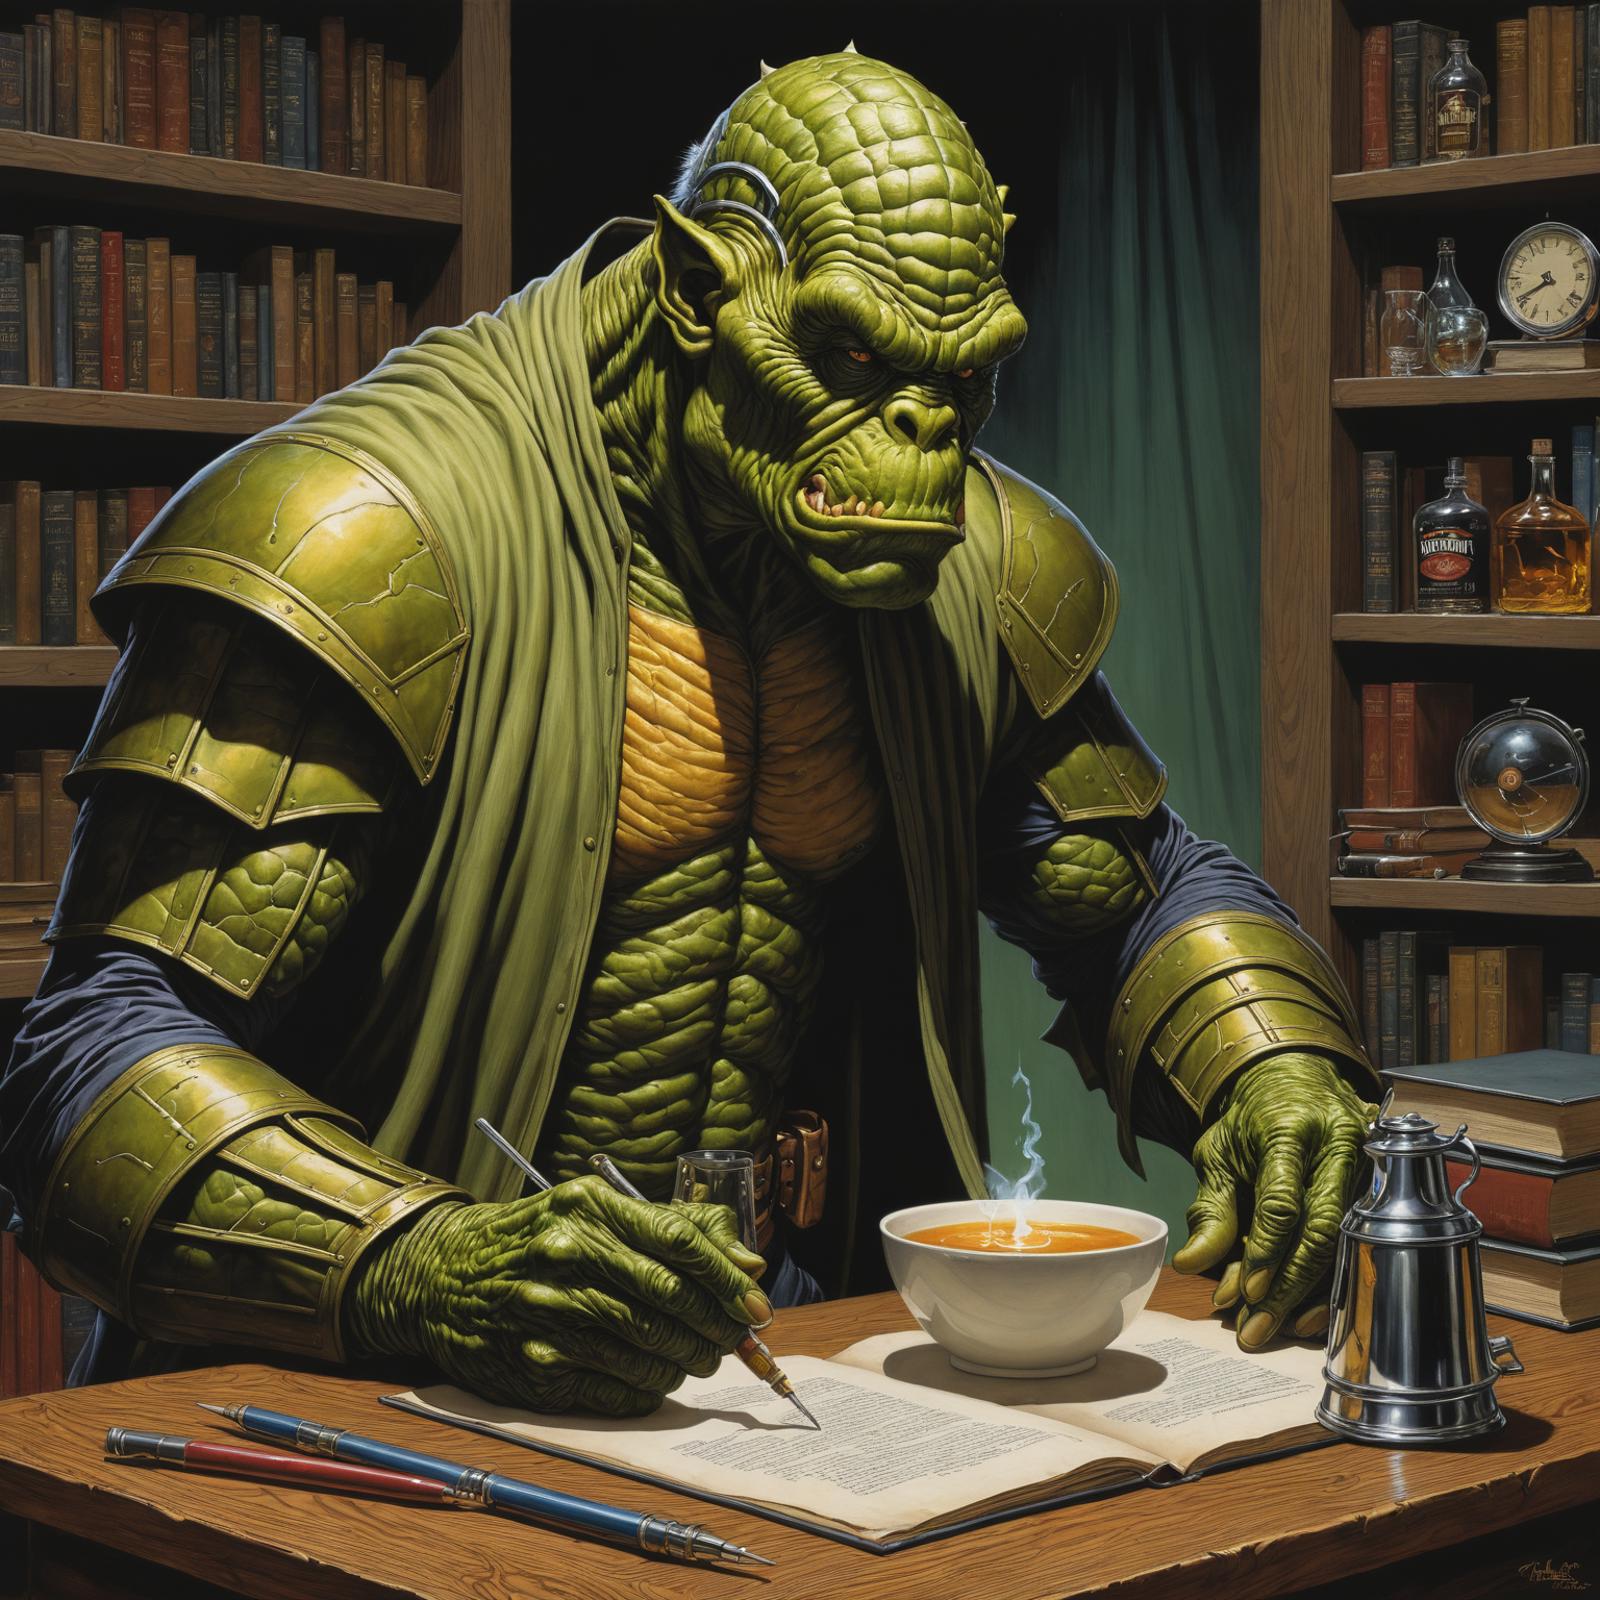 A green, scaly humanoid creature with a pen in hand, sitting at a table with a bowl of soup and surrounded by numerous books.